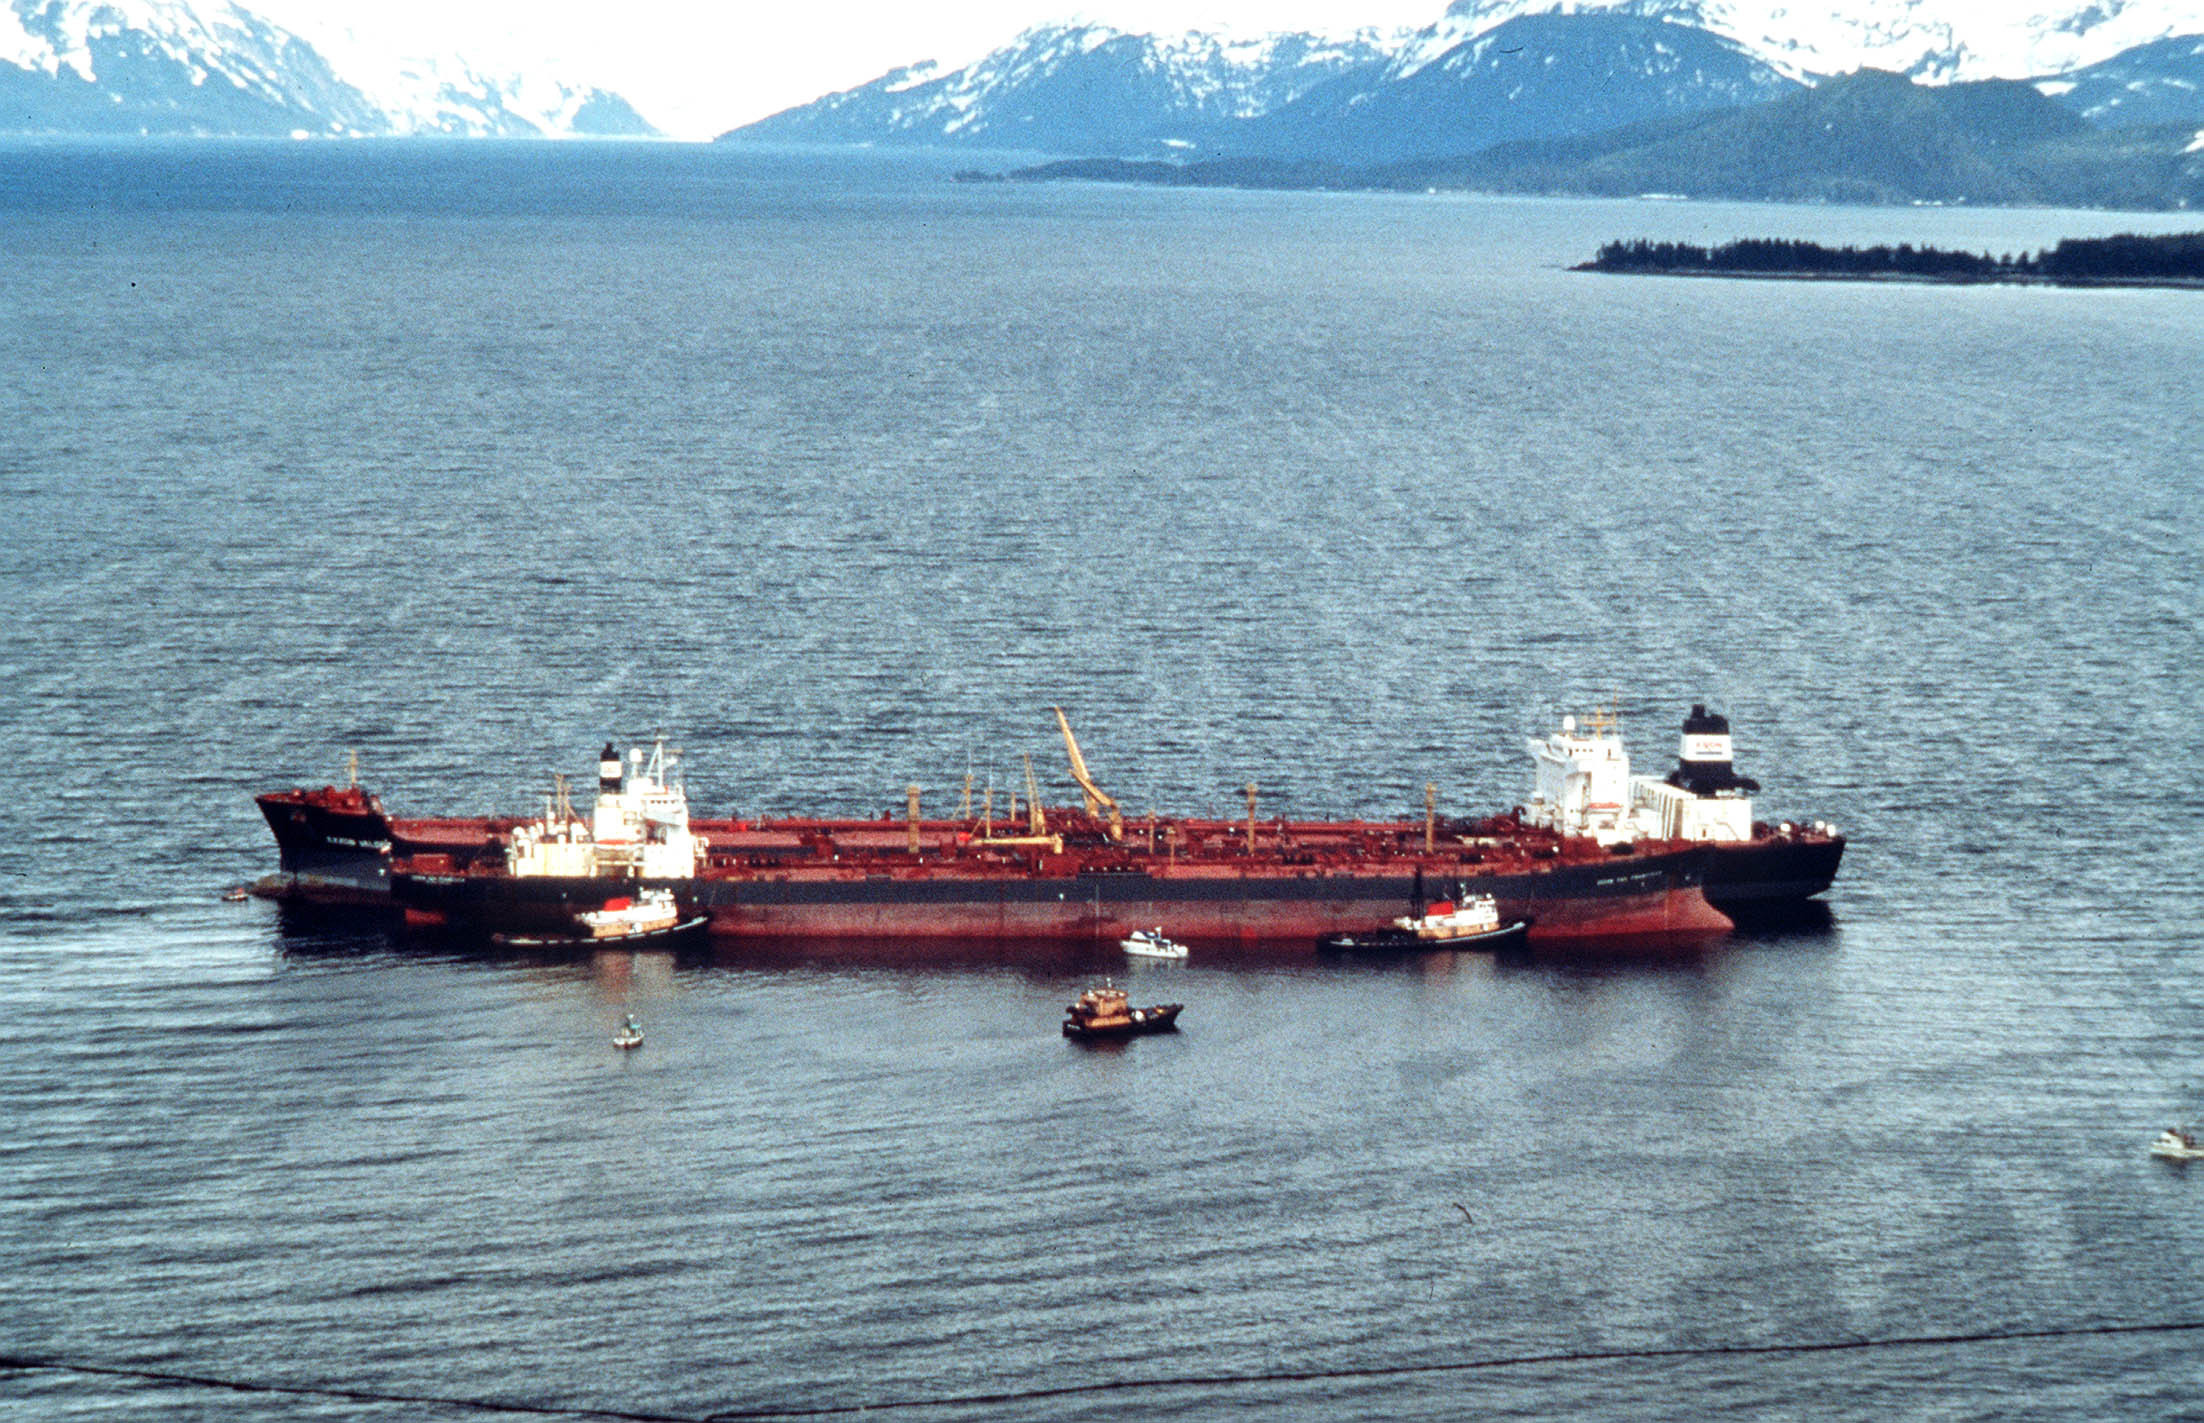 The tanker Exxon Valdez in 1989 after it ran aground in Prince William Sound, Alaska, spilling 15 million gallons of crude oil. (U.S. Coast Guard)